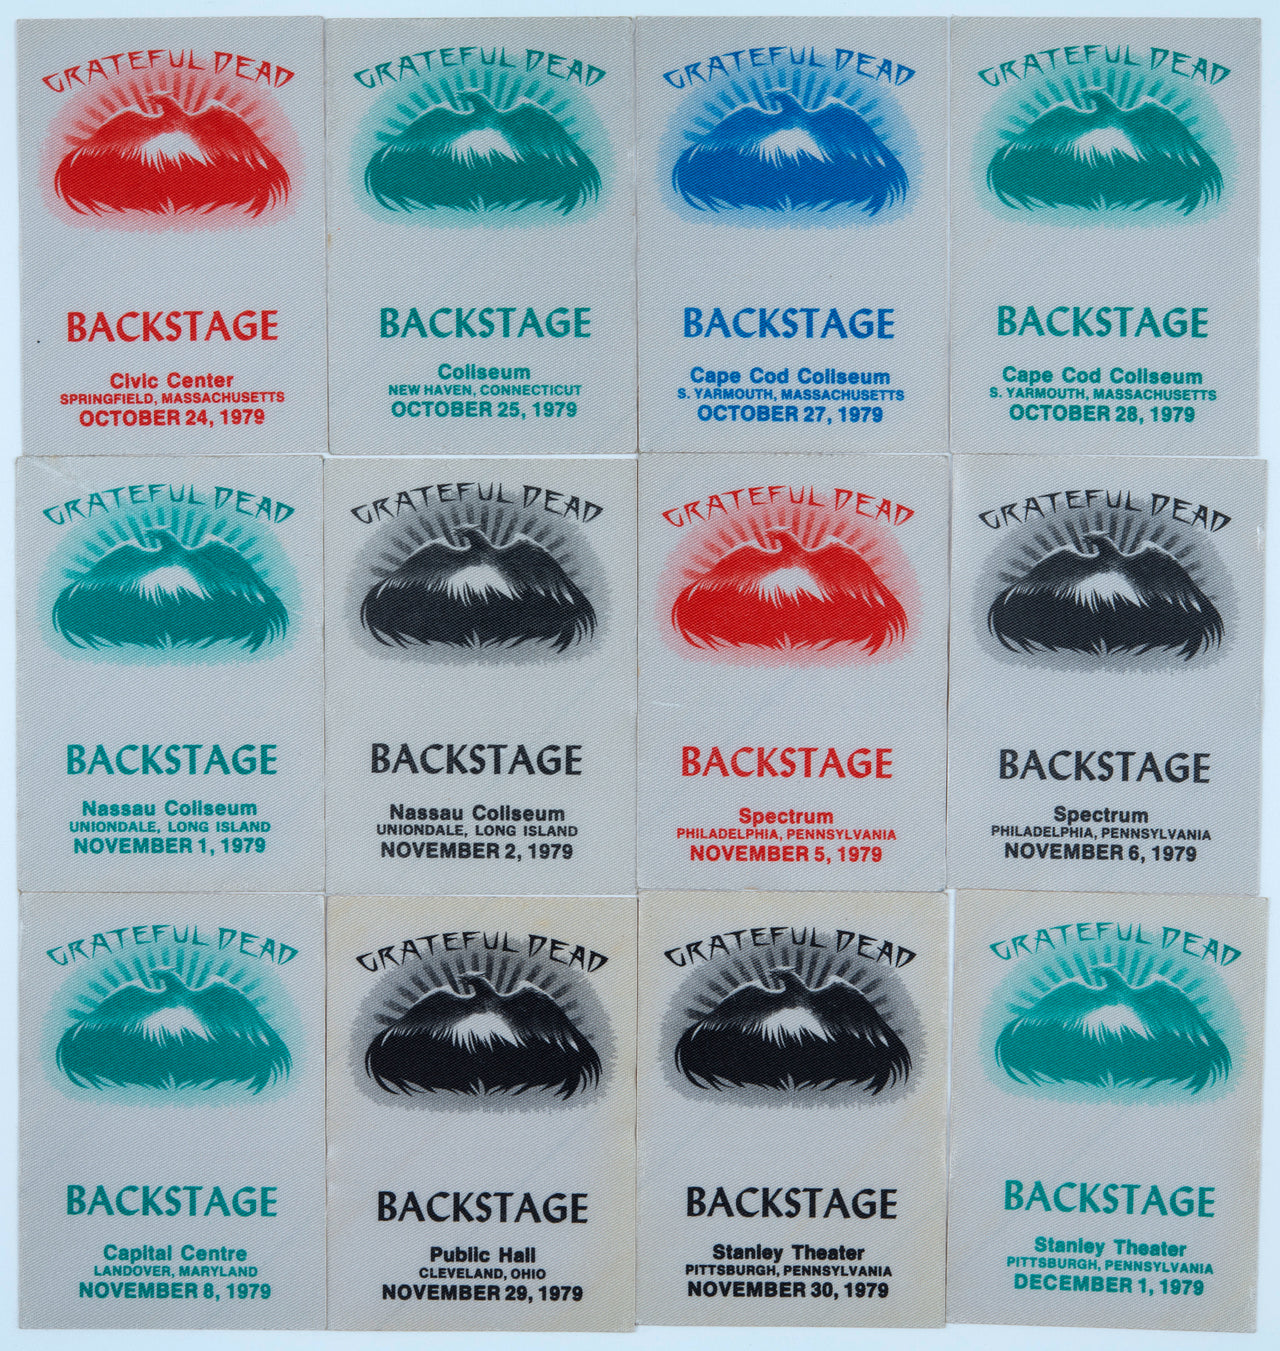 Grateful Dead Backstage Passes (10/24/1979 - 12/1/1979) from Dan Healy